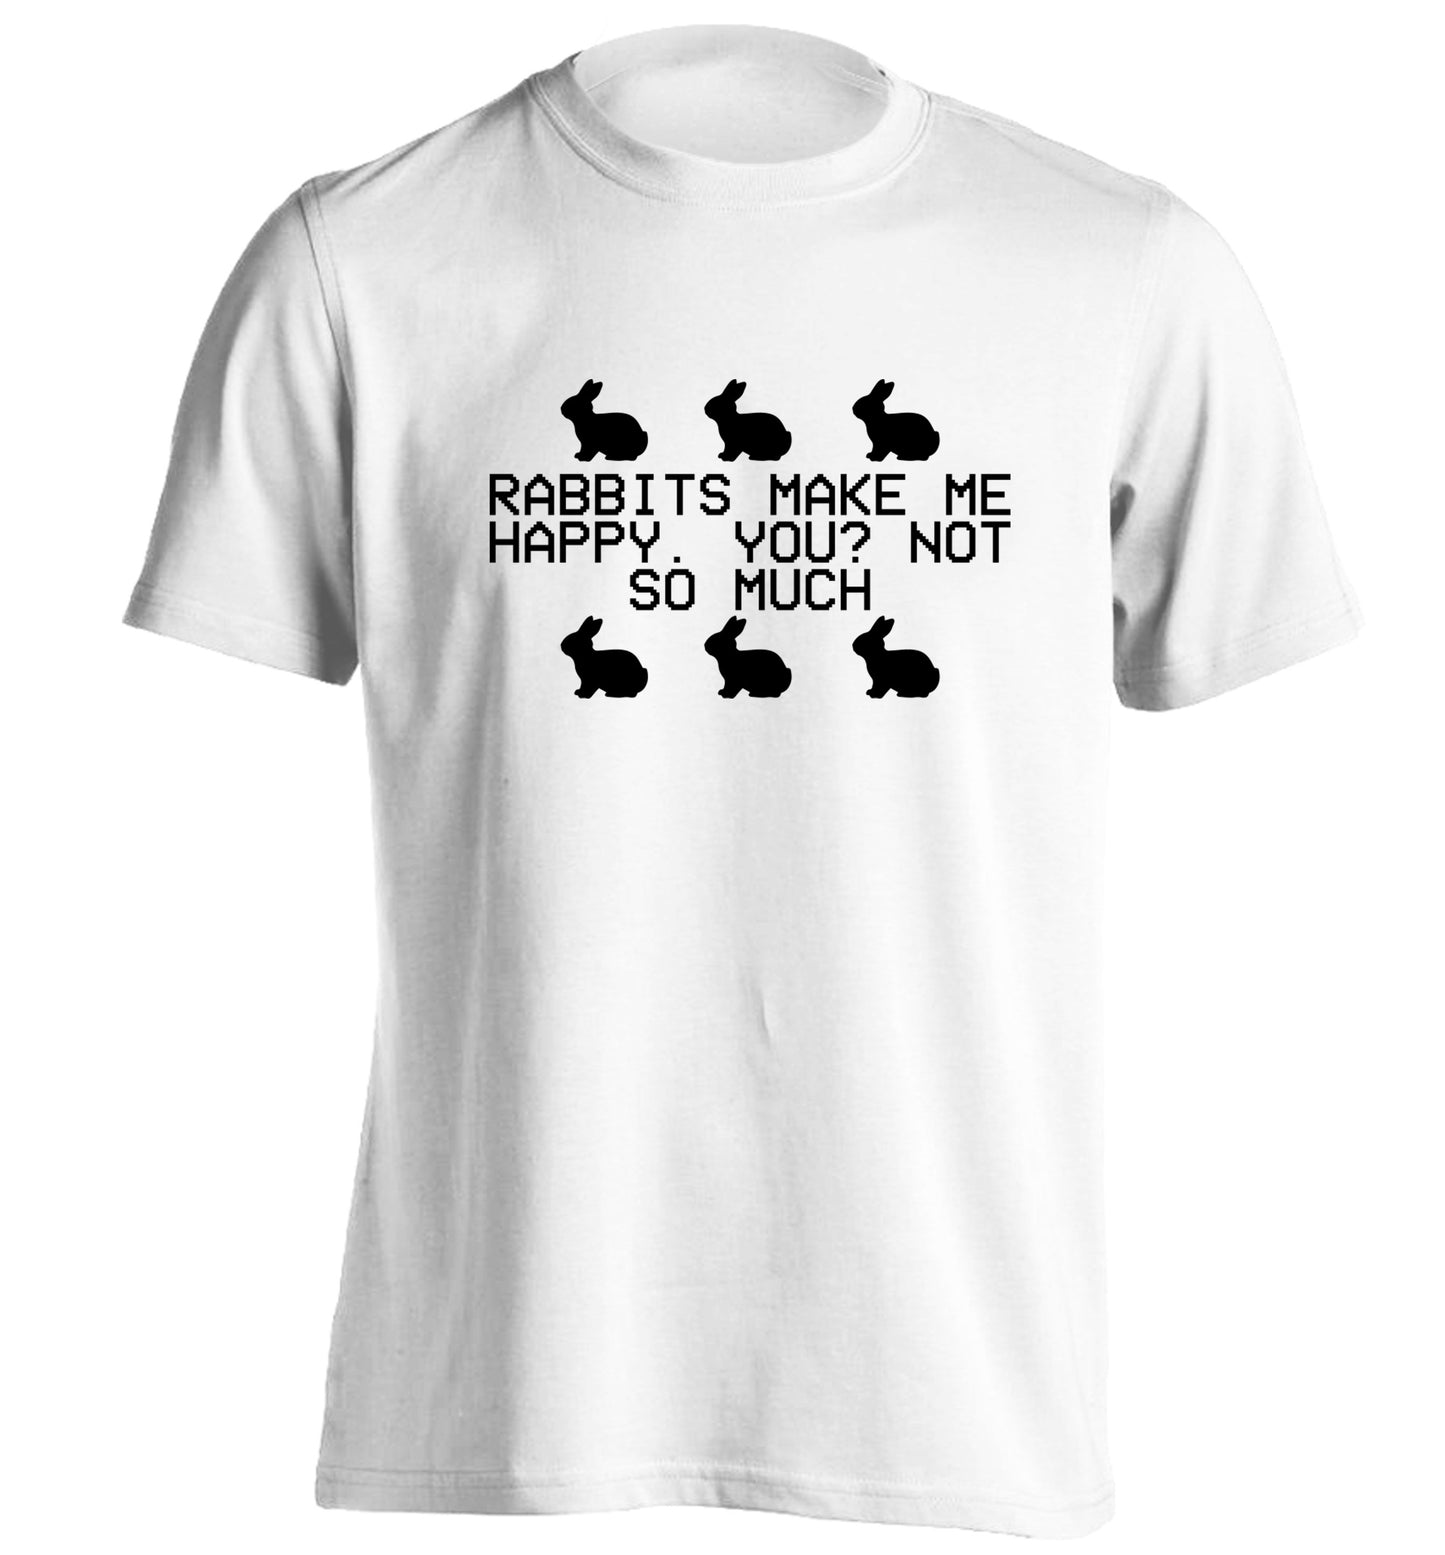 Rabbits make me happy, you not so much adults unisex white Tshirt 2XL